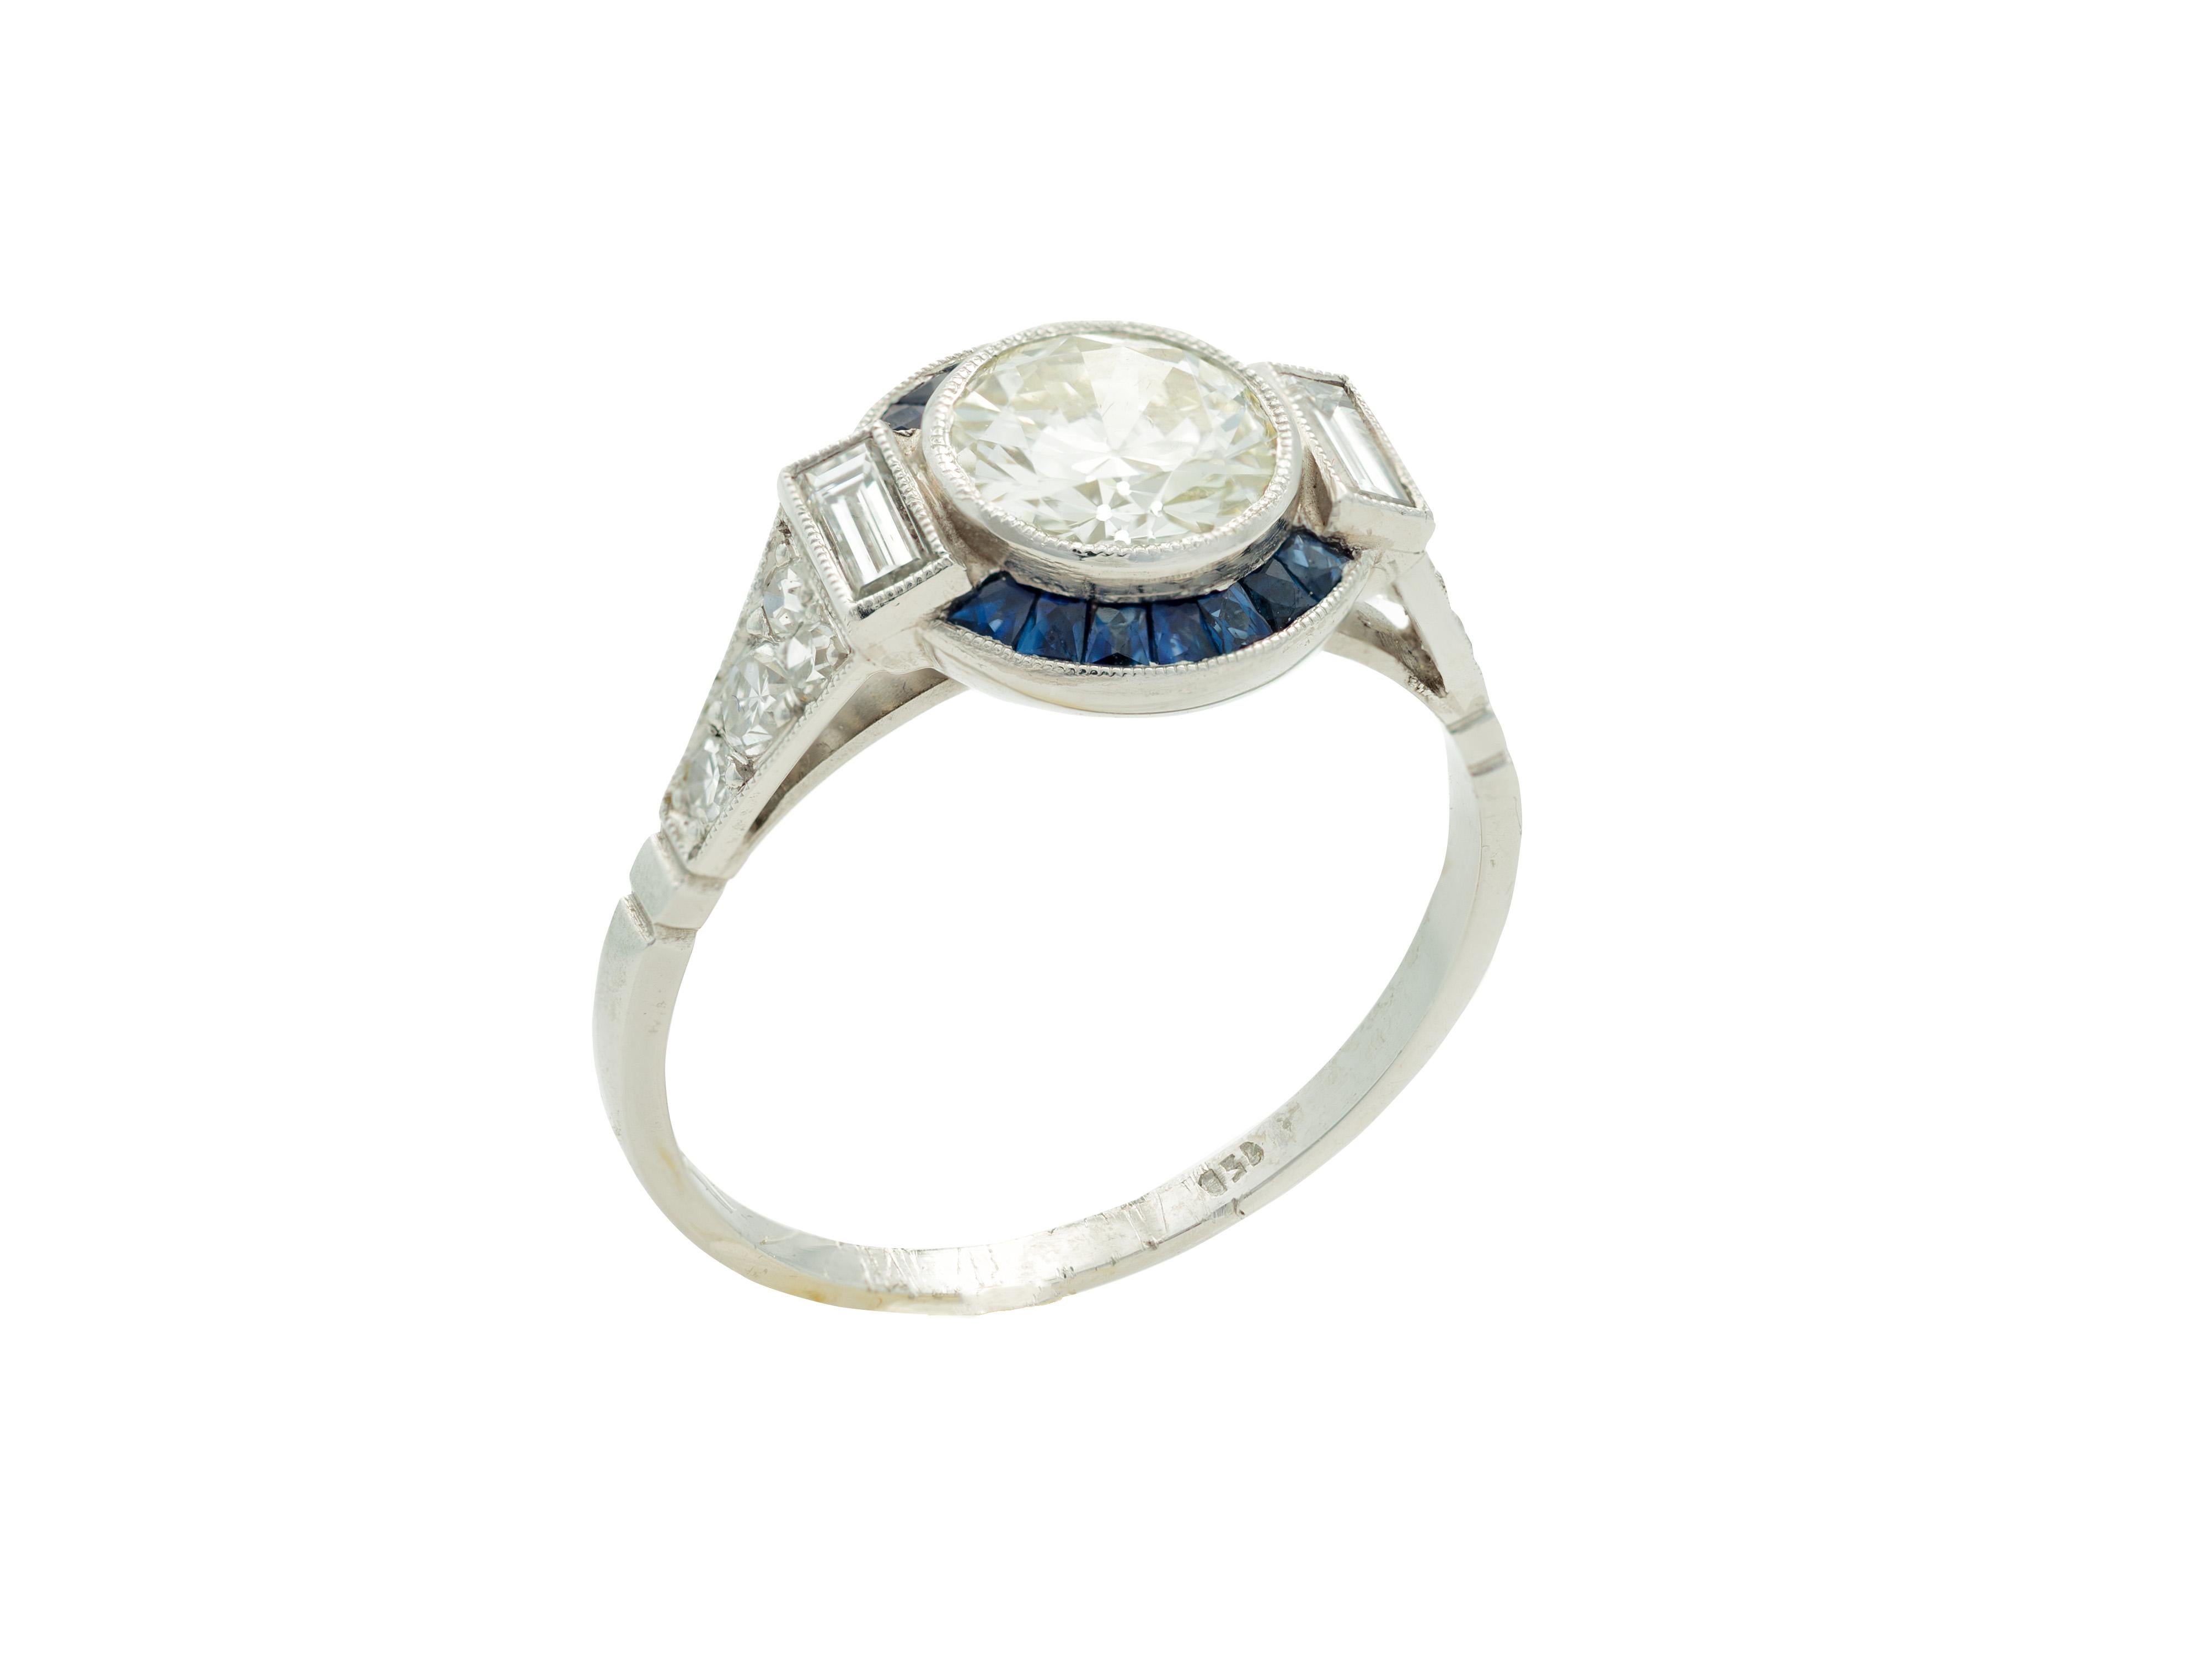 An Art Deco style round European cut Diamond ring with Sapphire halo set in platinum, size 7.5, circa 1960. Created in the USA during the mid-century period, this Art Deco revival ring features a central 1.11 carat round European cut Diamond of H